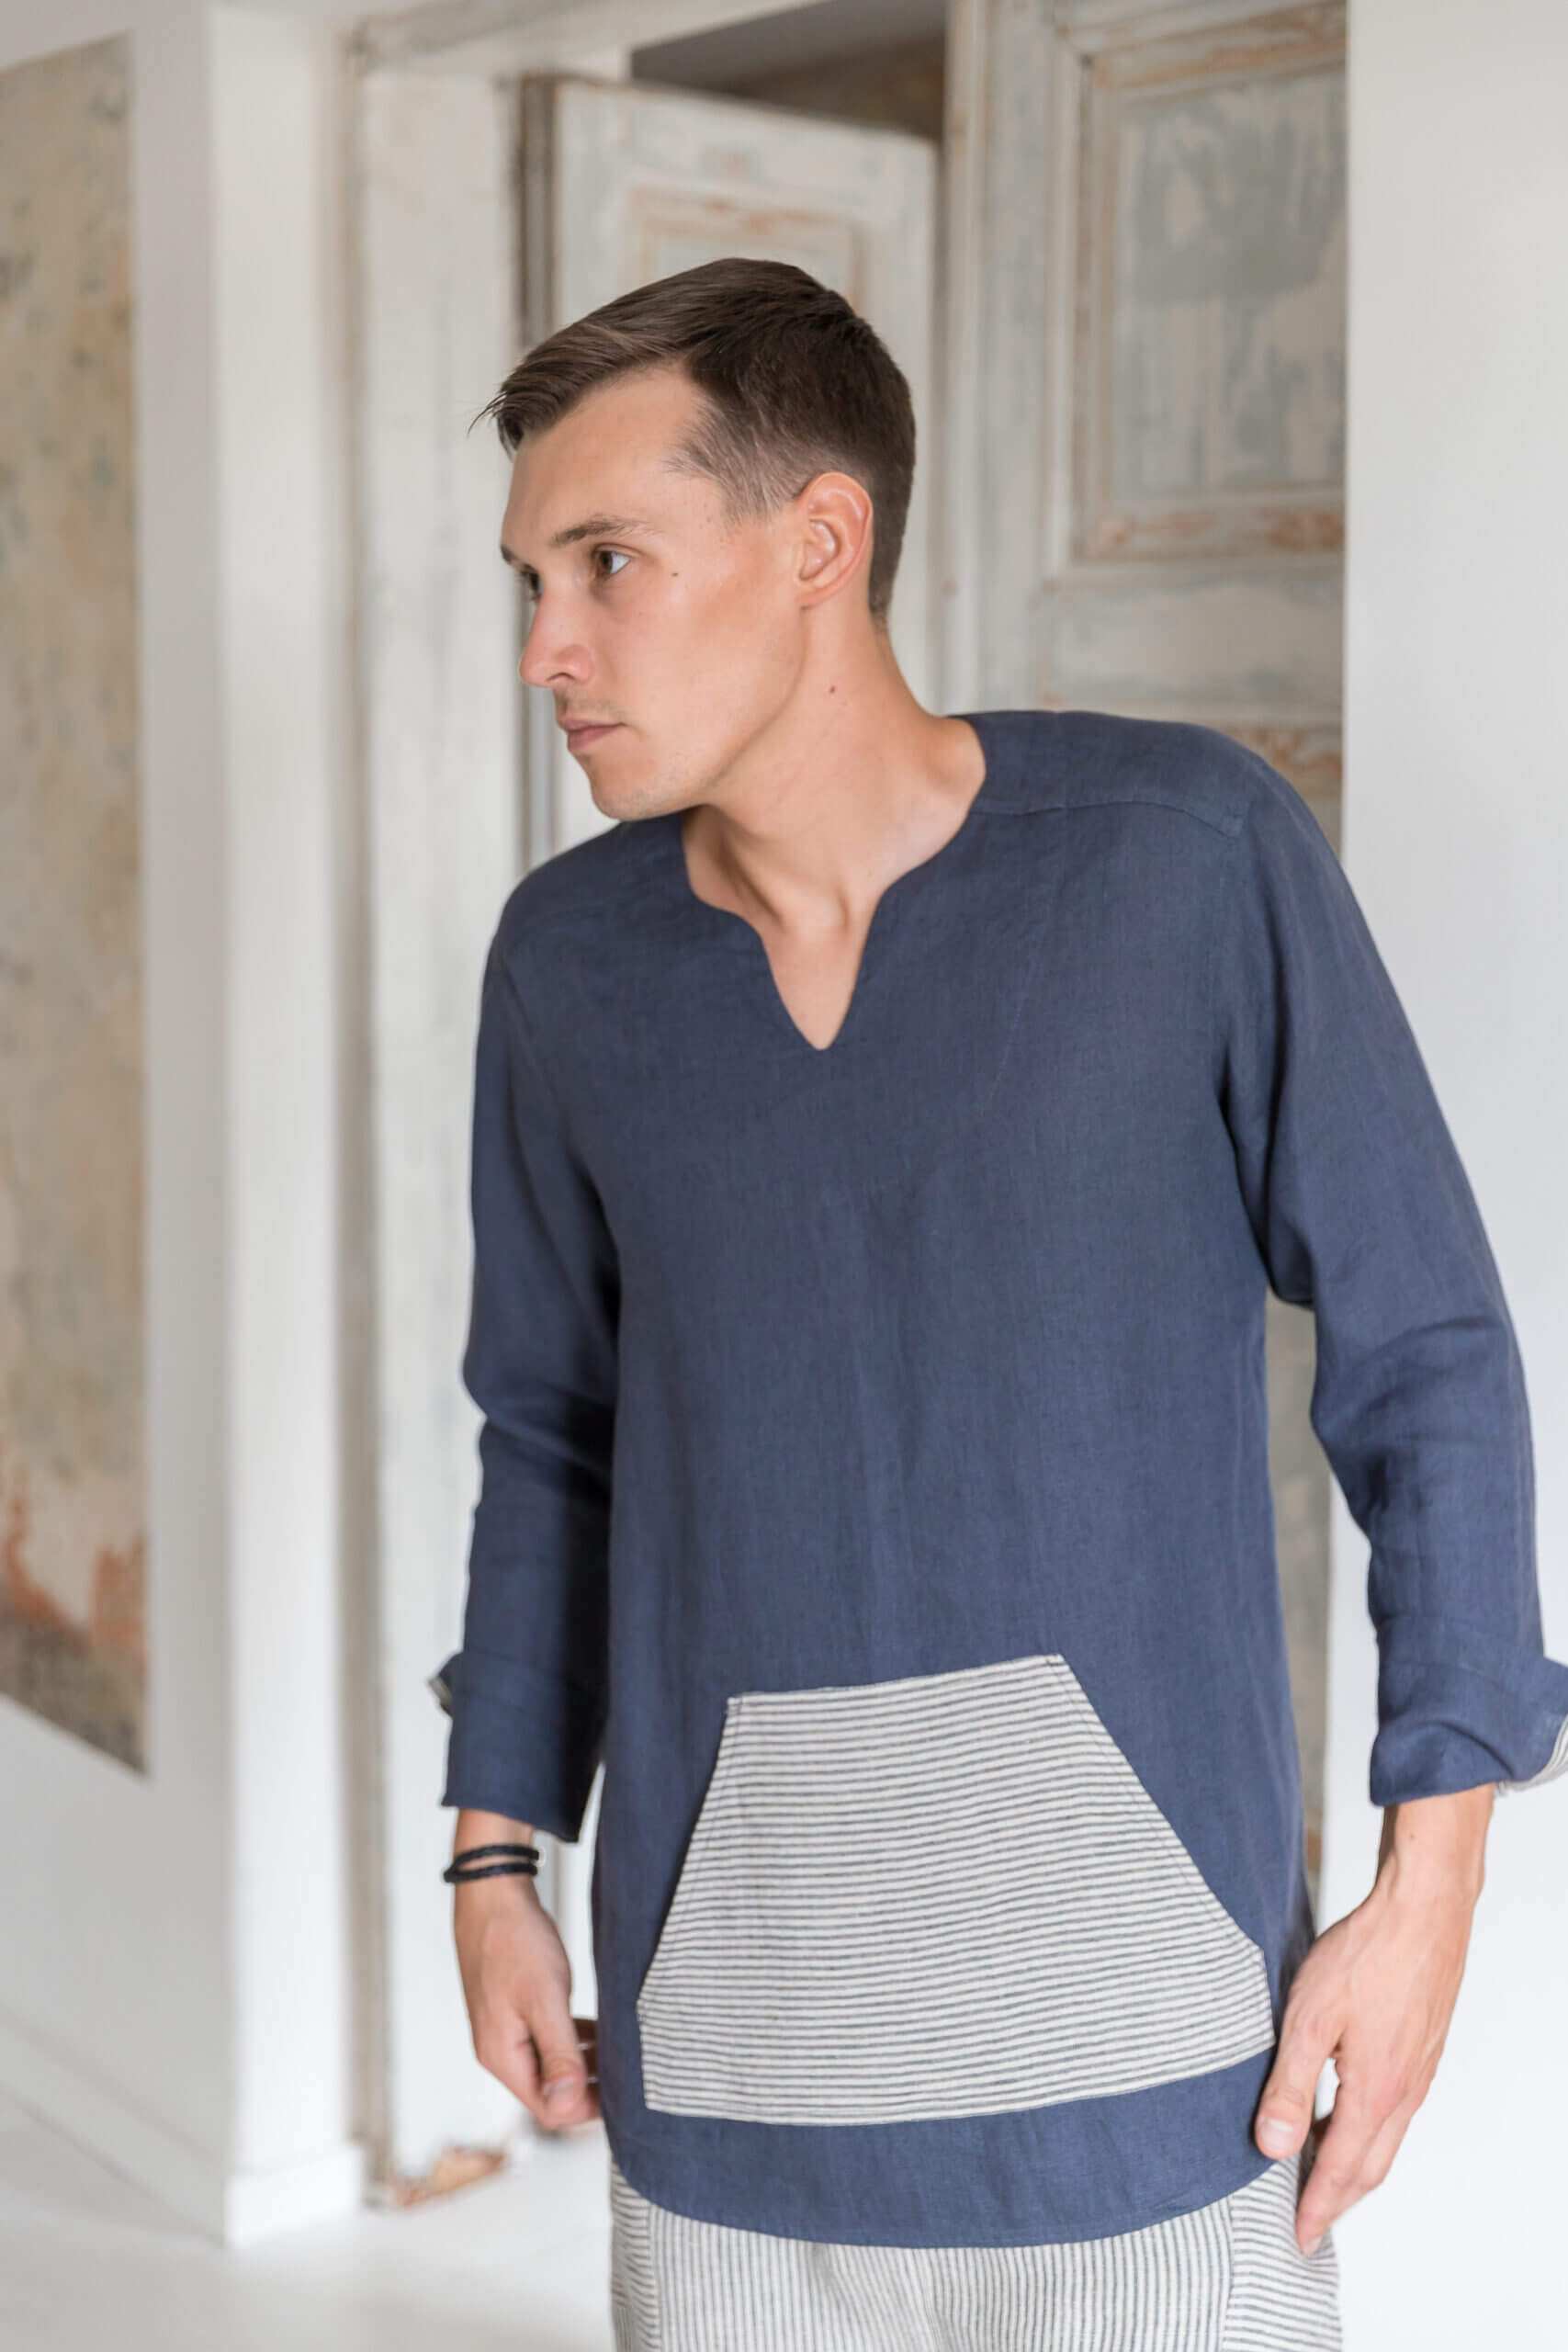 Stylish graphite linen explorer shirt with a striped pocket accent